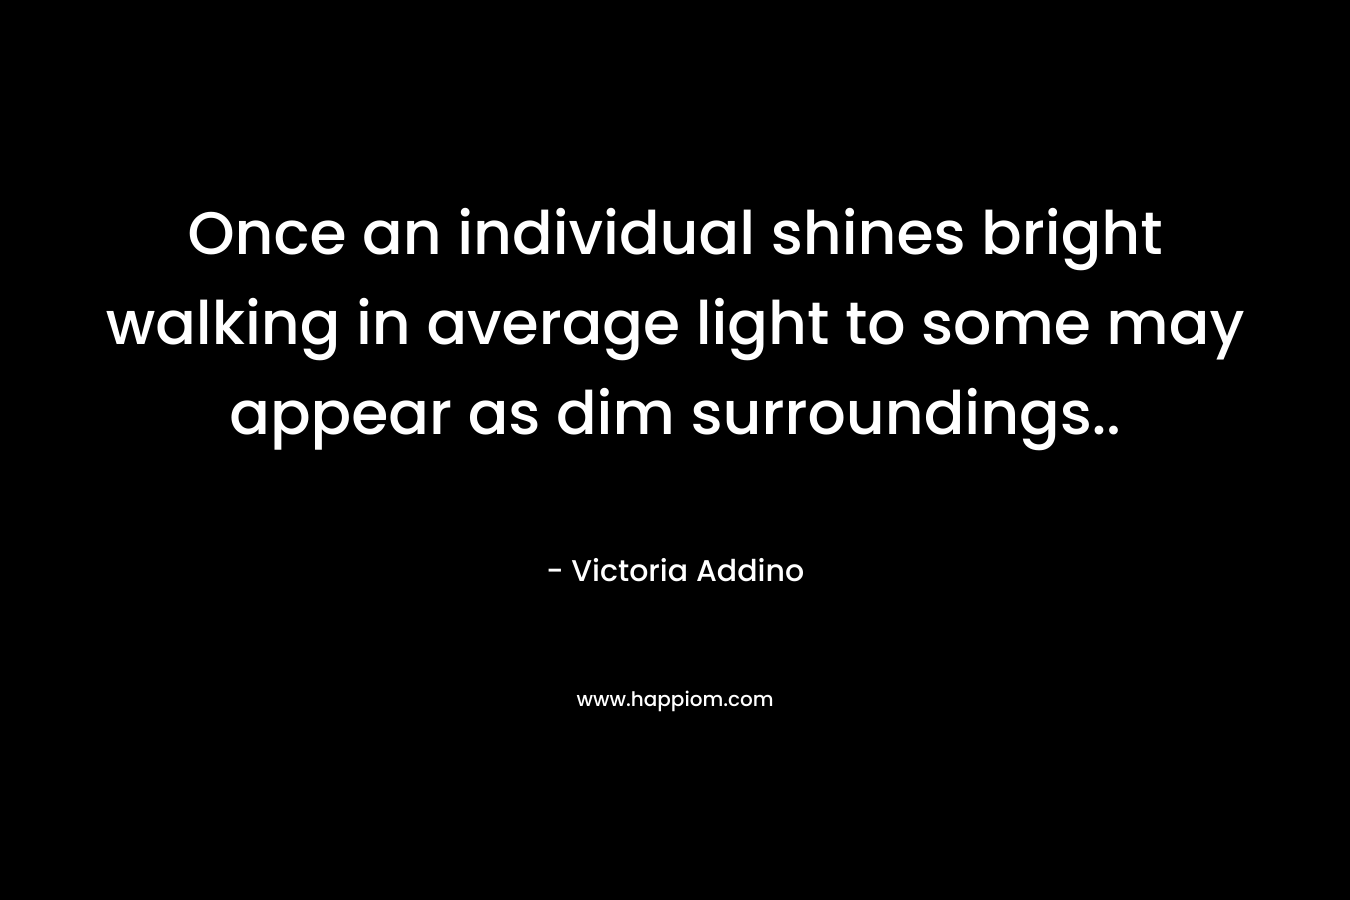 Once an individual shines bright walking in average light to some may appear as dim surroundings..